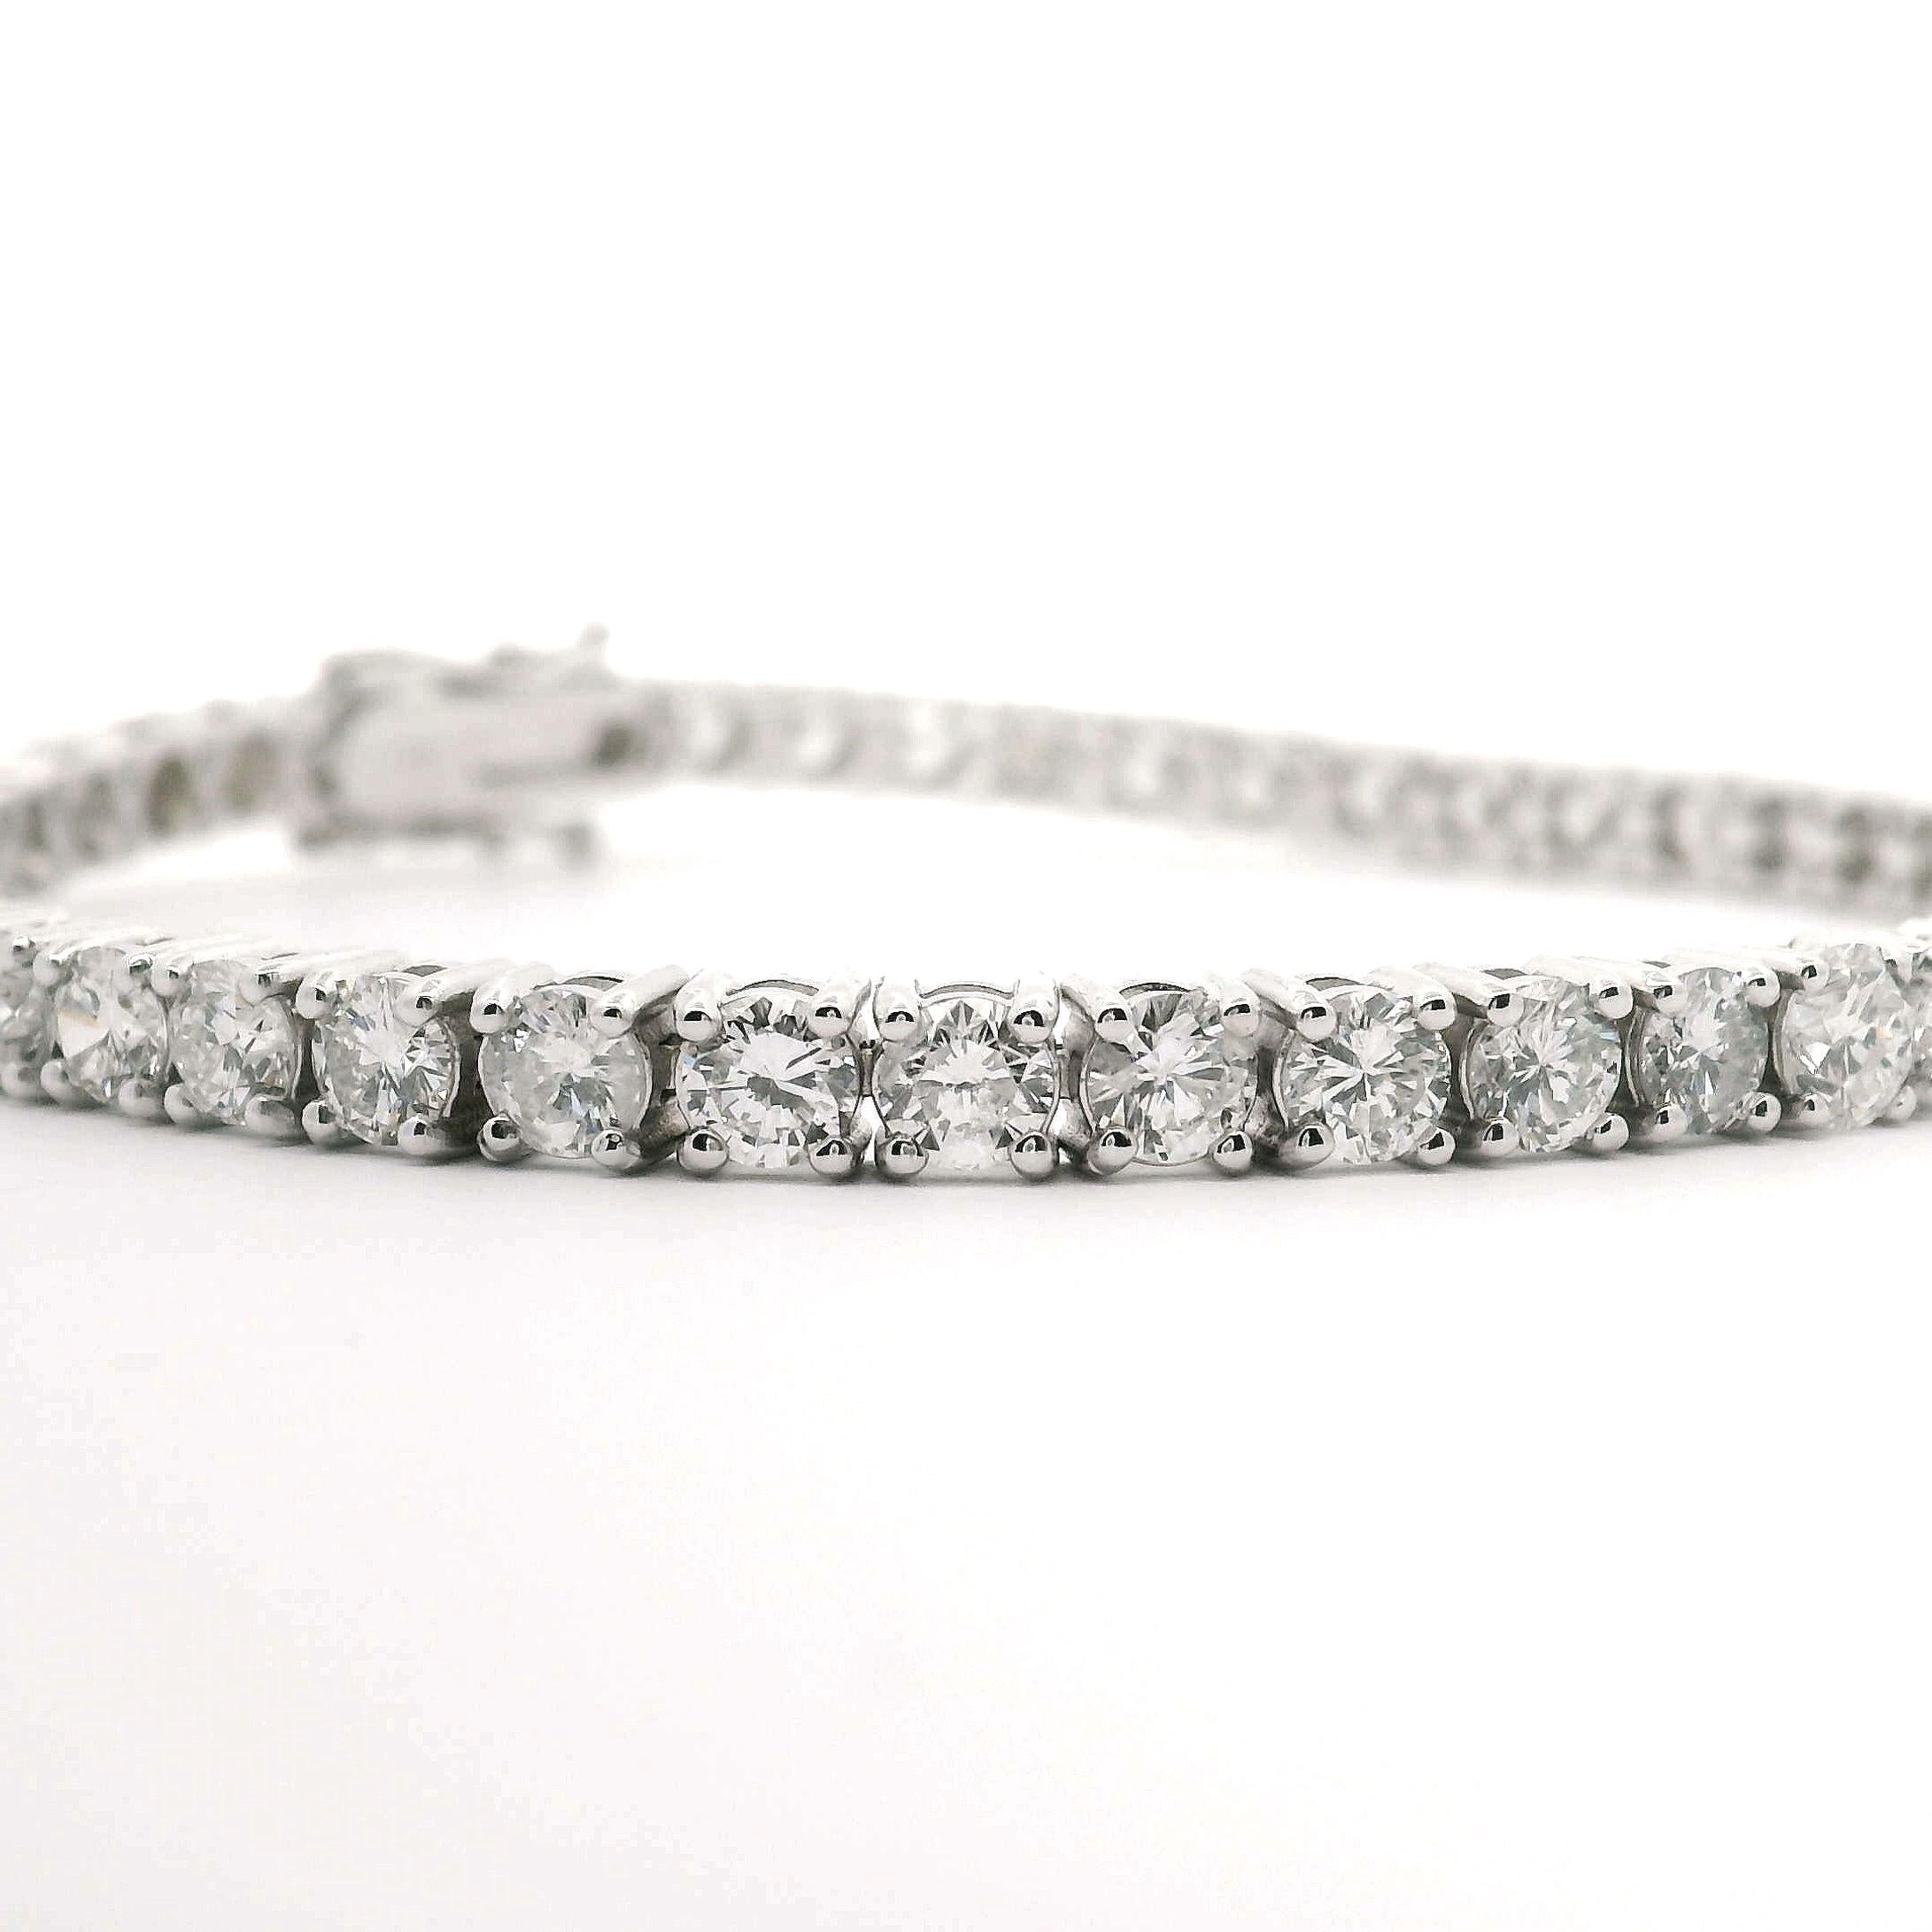 Condition:  Brand New
Metal:  14k White Gold
Weight:  12.1g
Length:  7 Inches
Width:  4mm
Diamonds:  Round Brilliant Diamonds 8cttw
Diamond Color and Clarity:  H and SI3-I1
Closure:  Box Tab Insert with Two Safety Latches
Markings:  